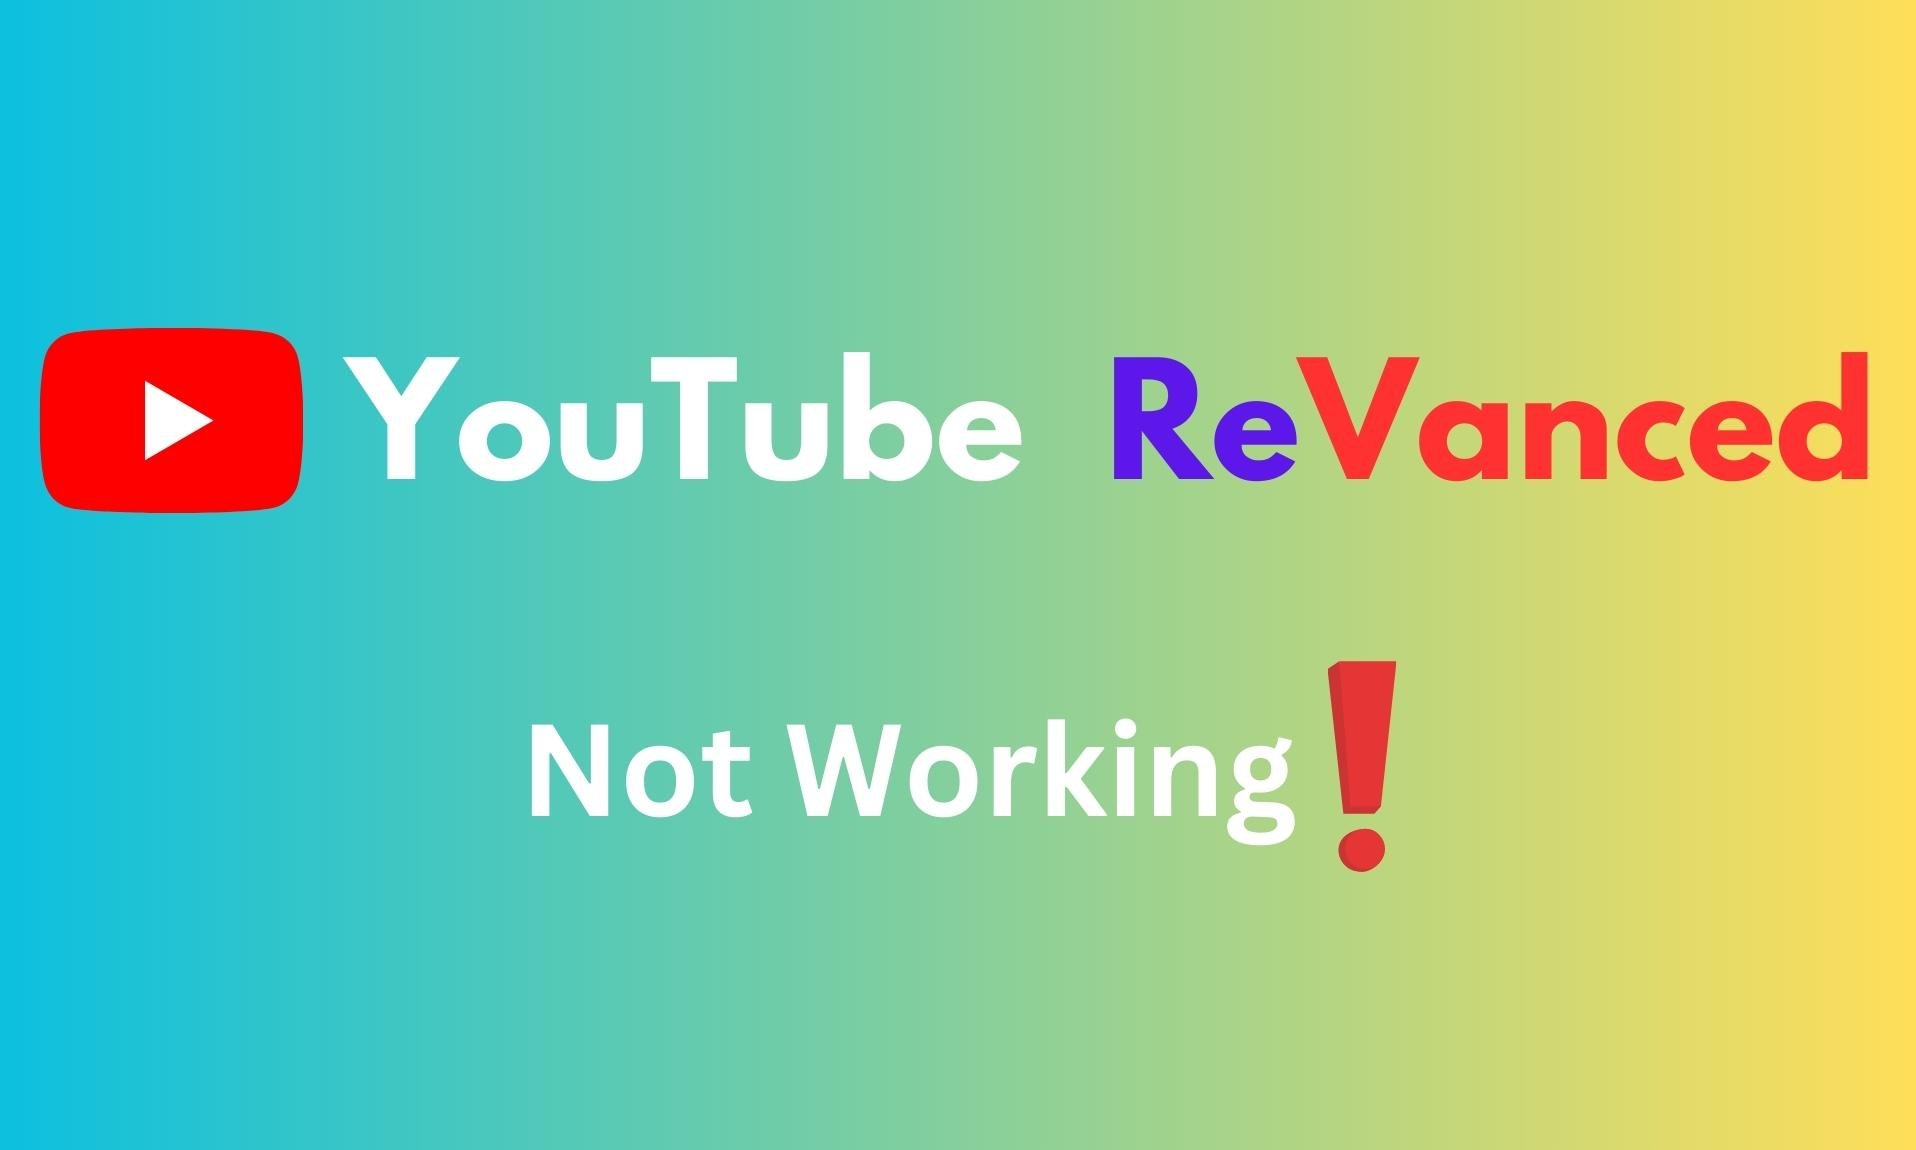 How to Fix YouTube ReVanced Not Working?